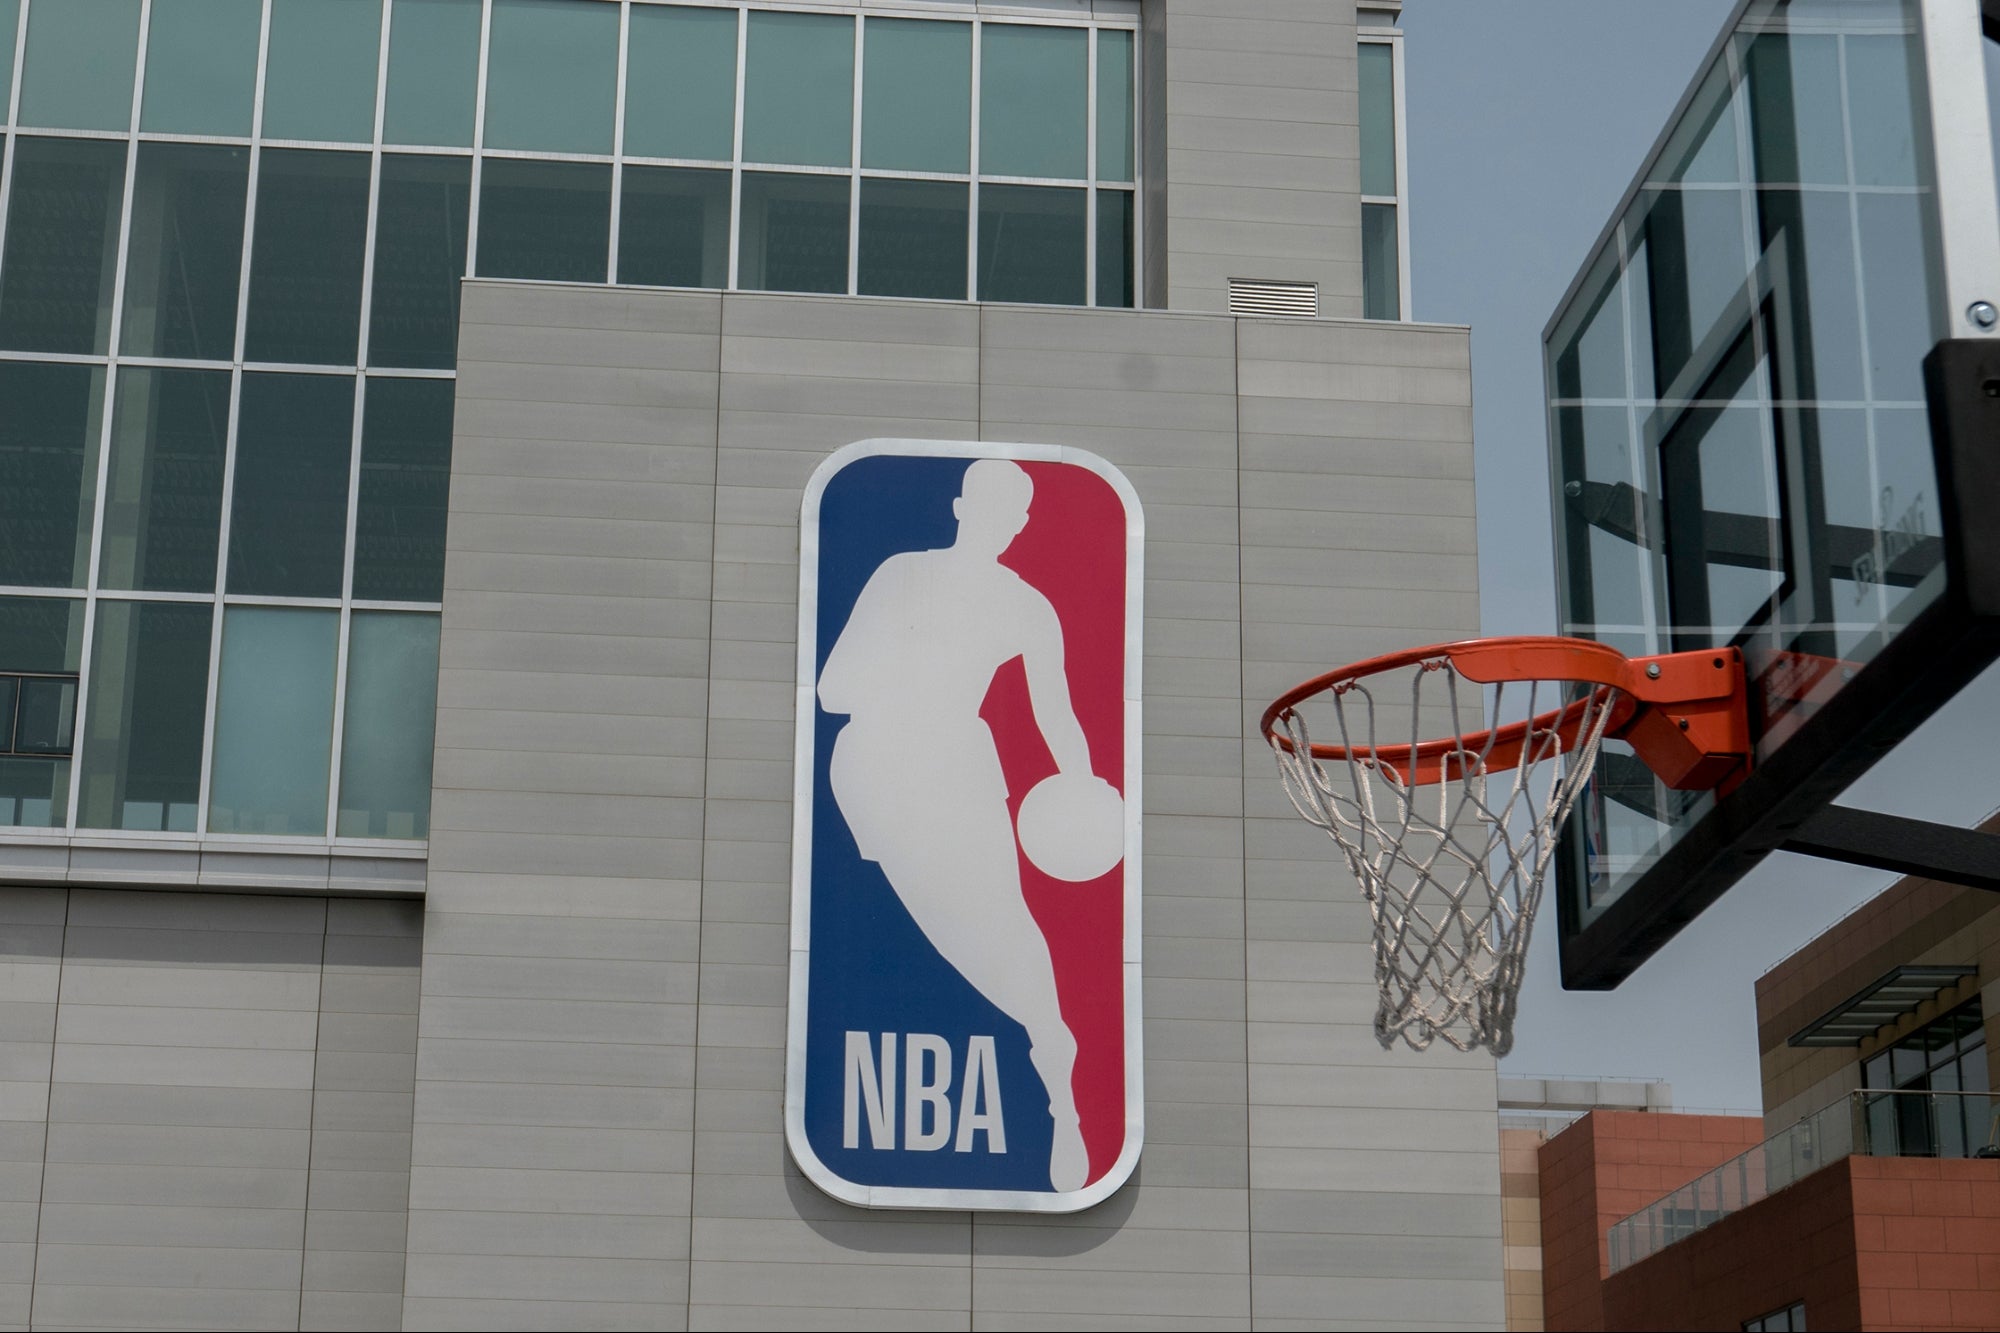 This NBA Team Will Soon Have the Option of Being Paid in Bitcoin